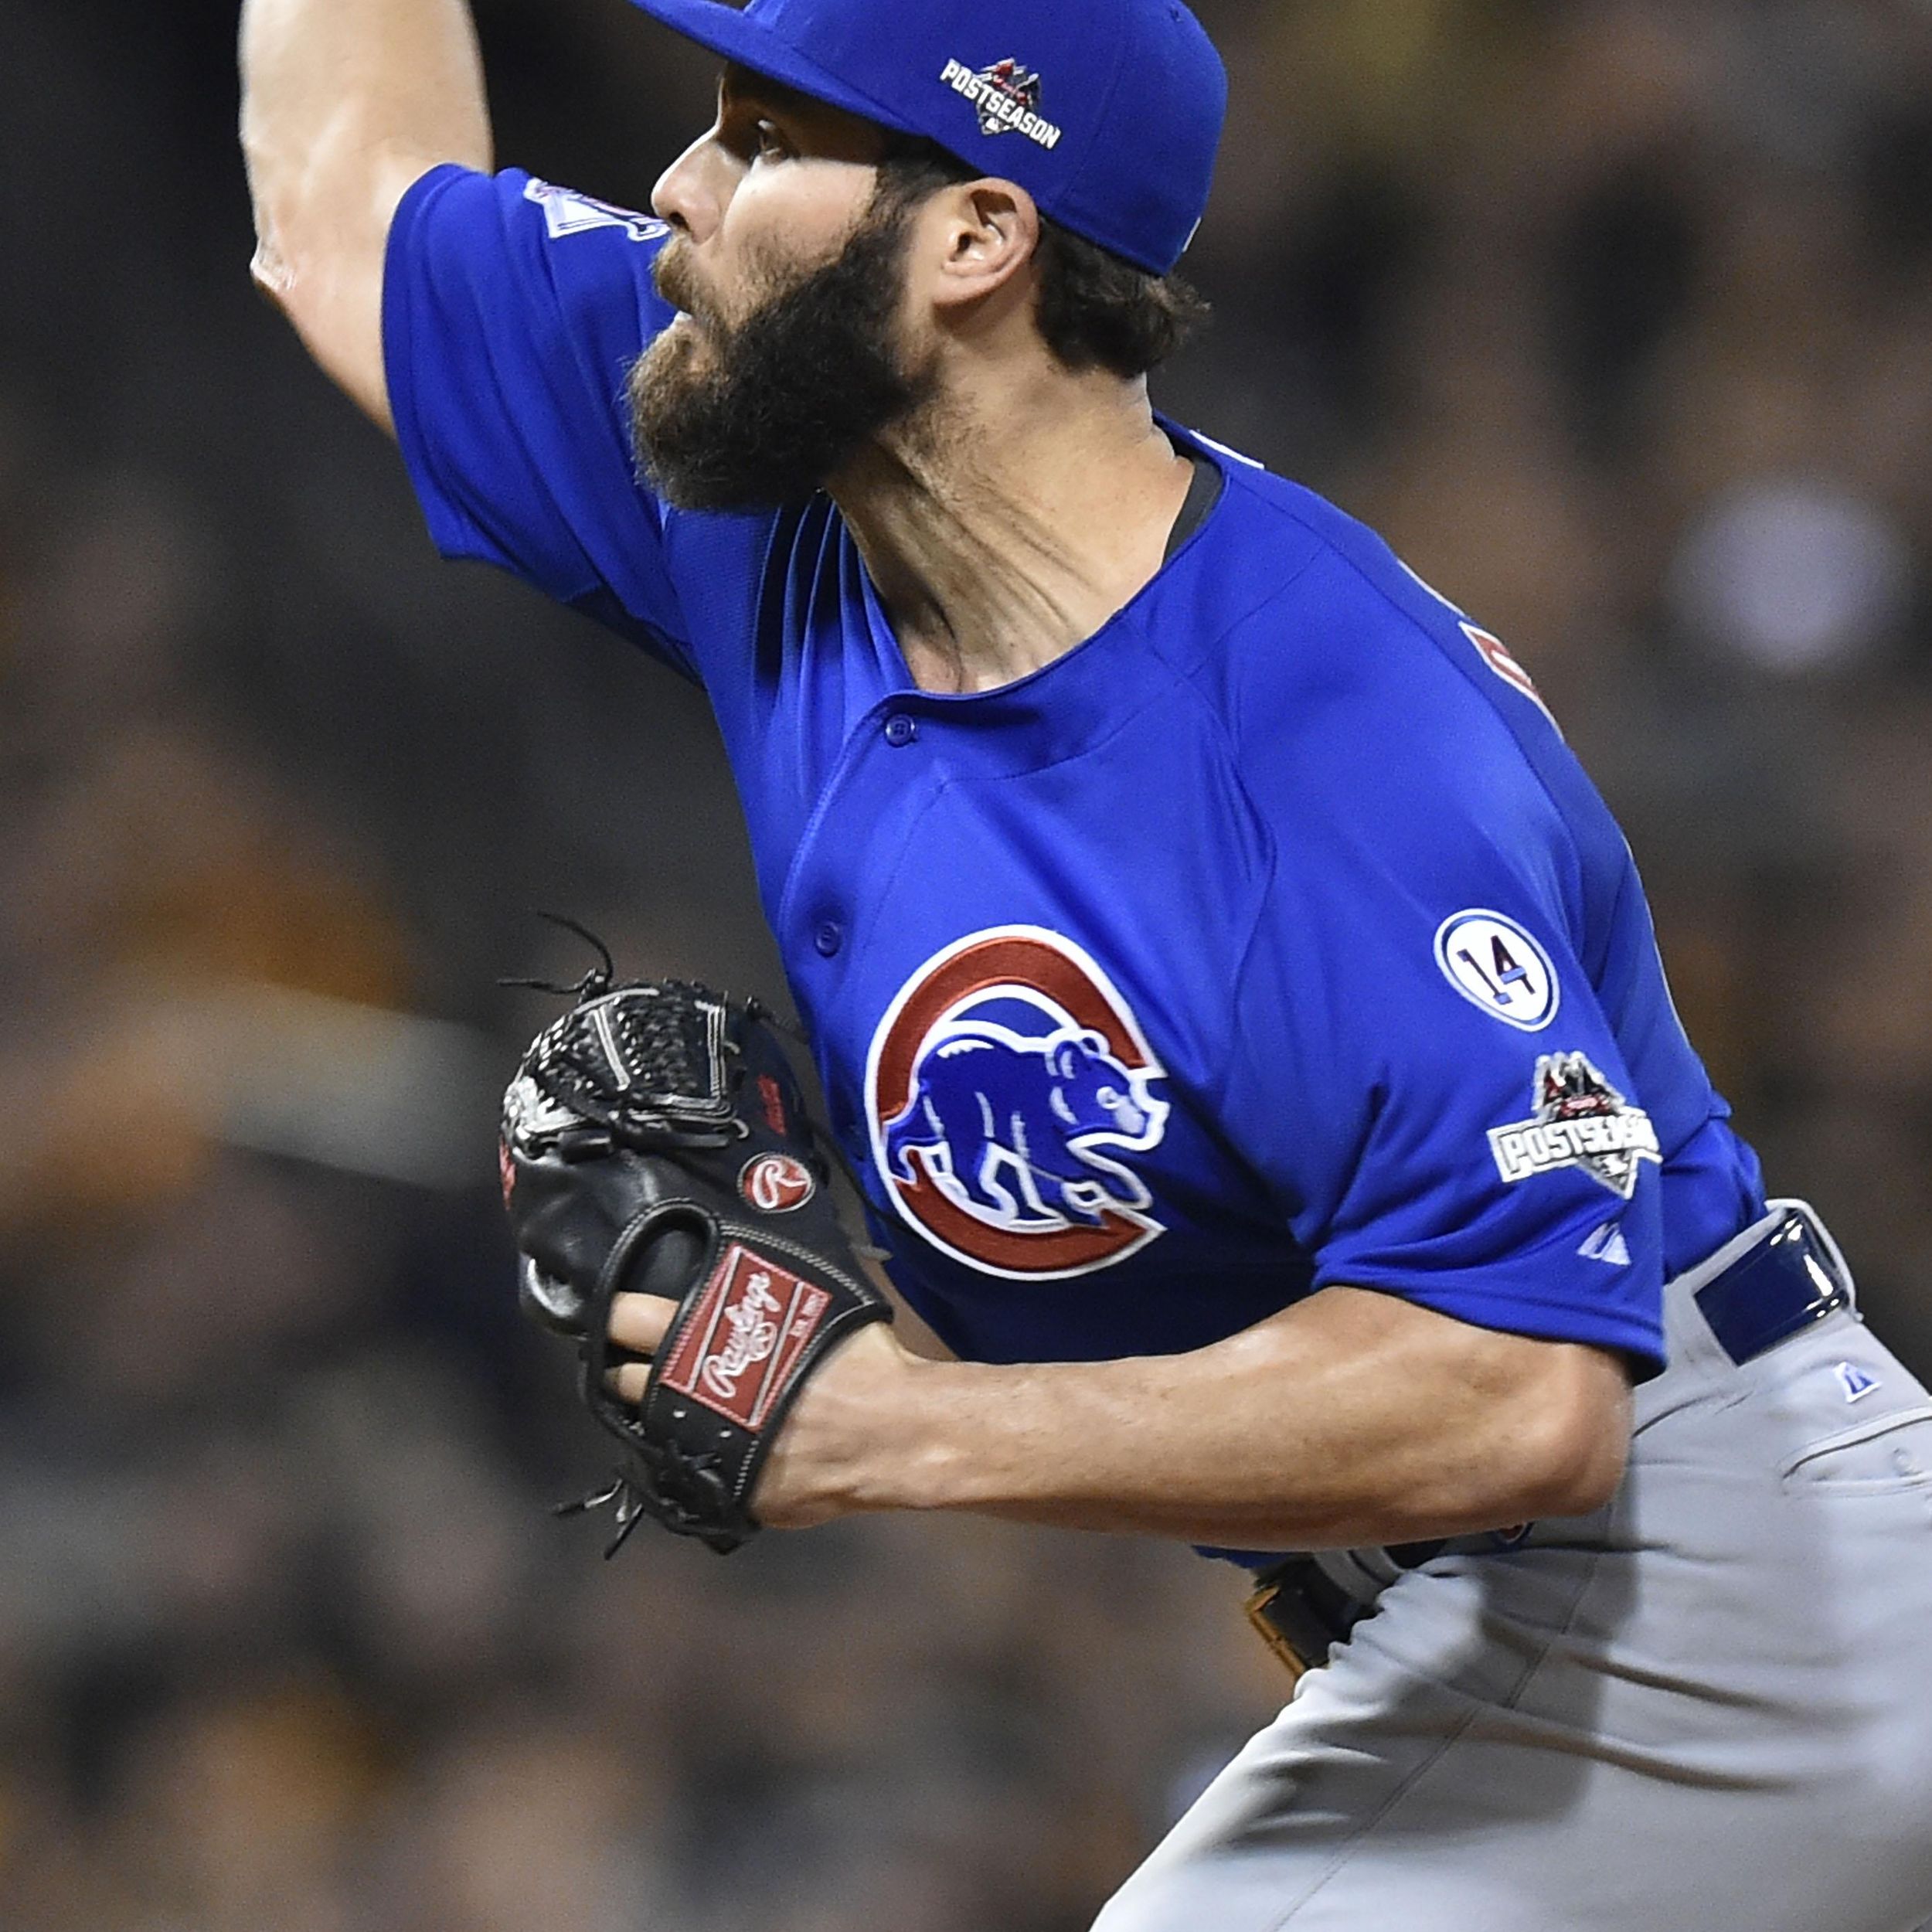 Chicago Cubs through to NLDS as Jake Arrieta masters Pittsburgh Pirates, MLB